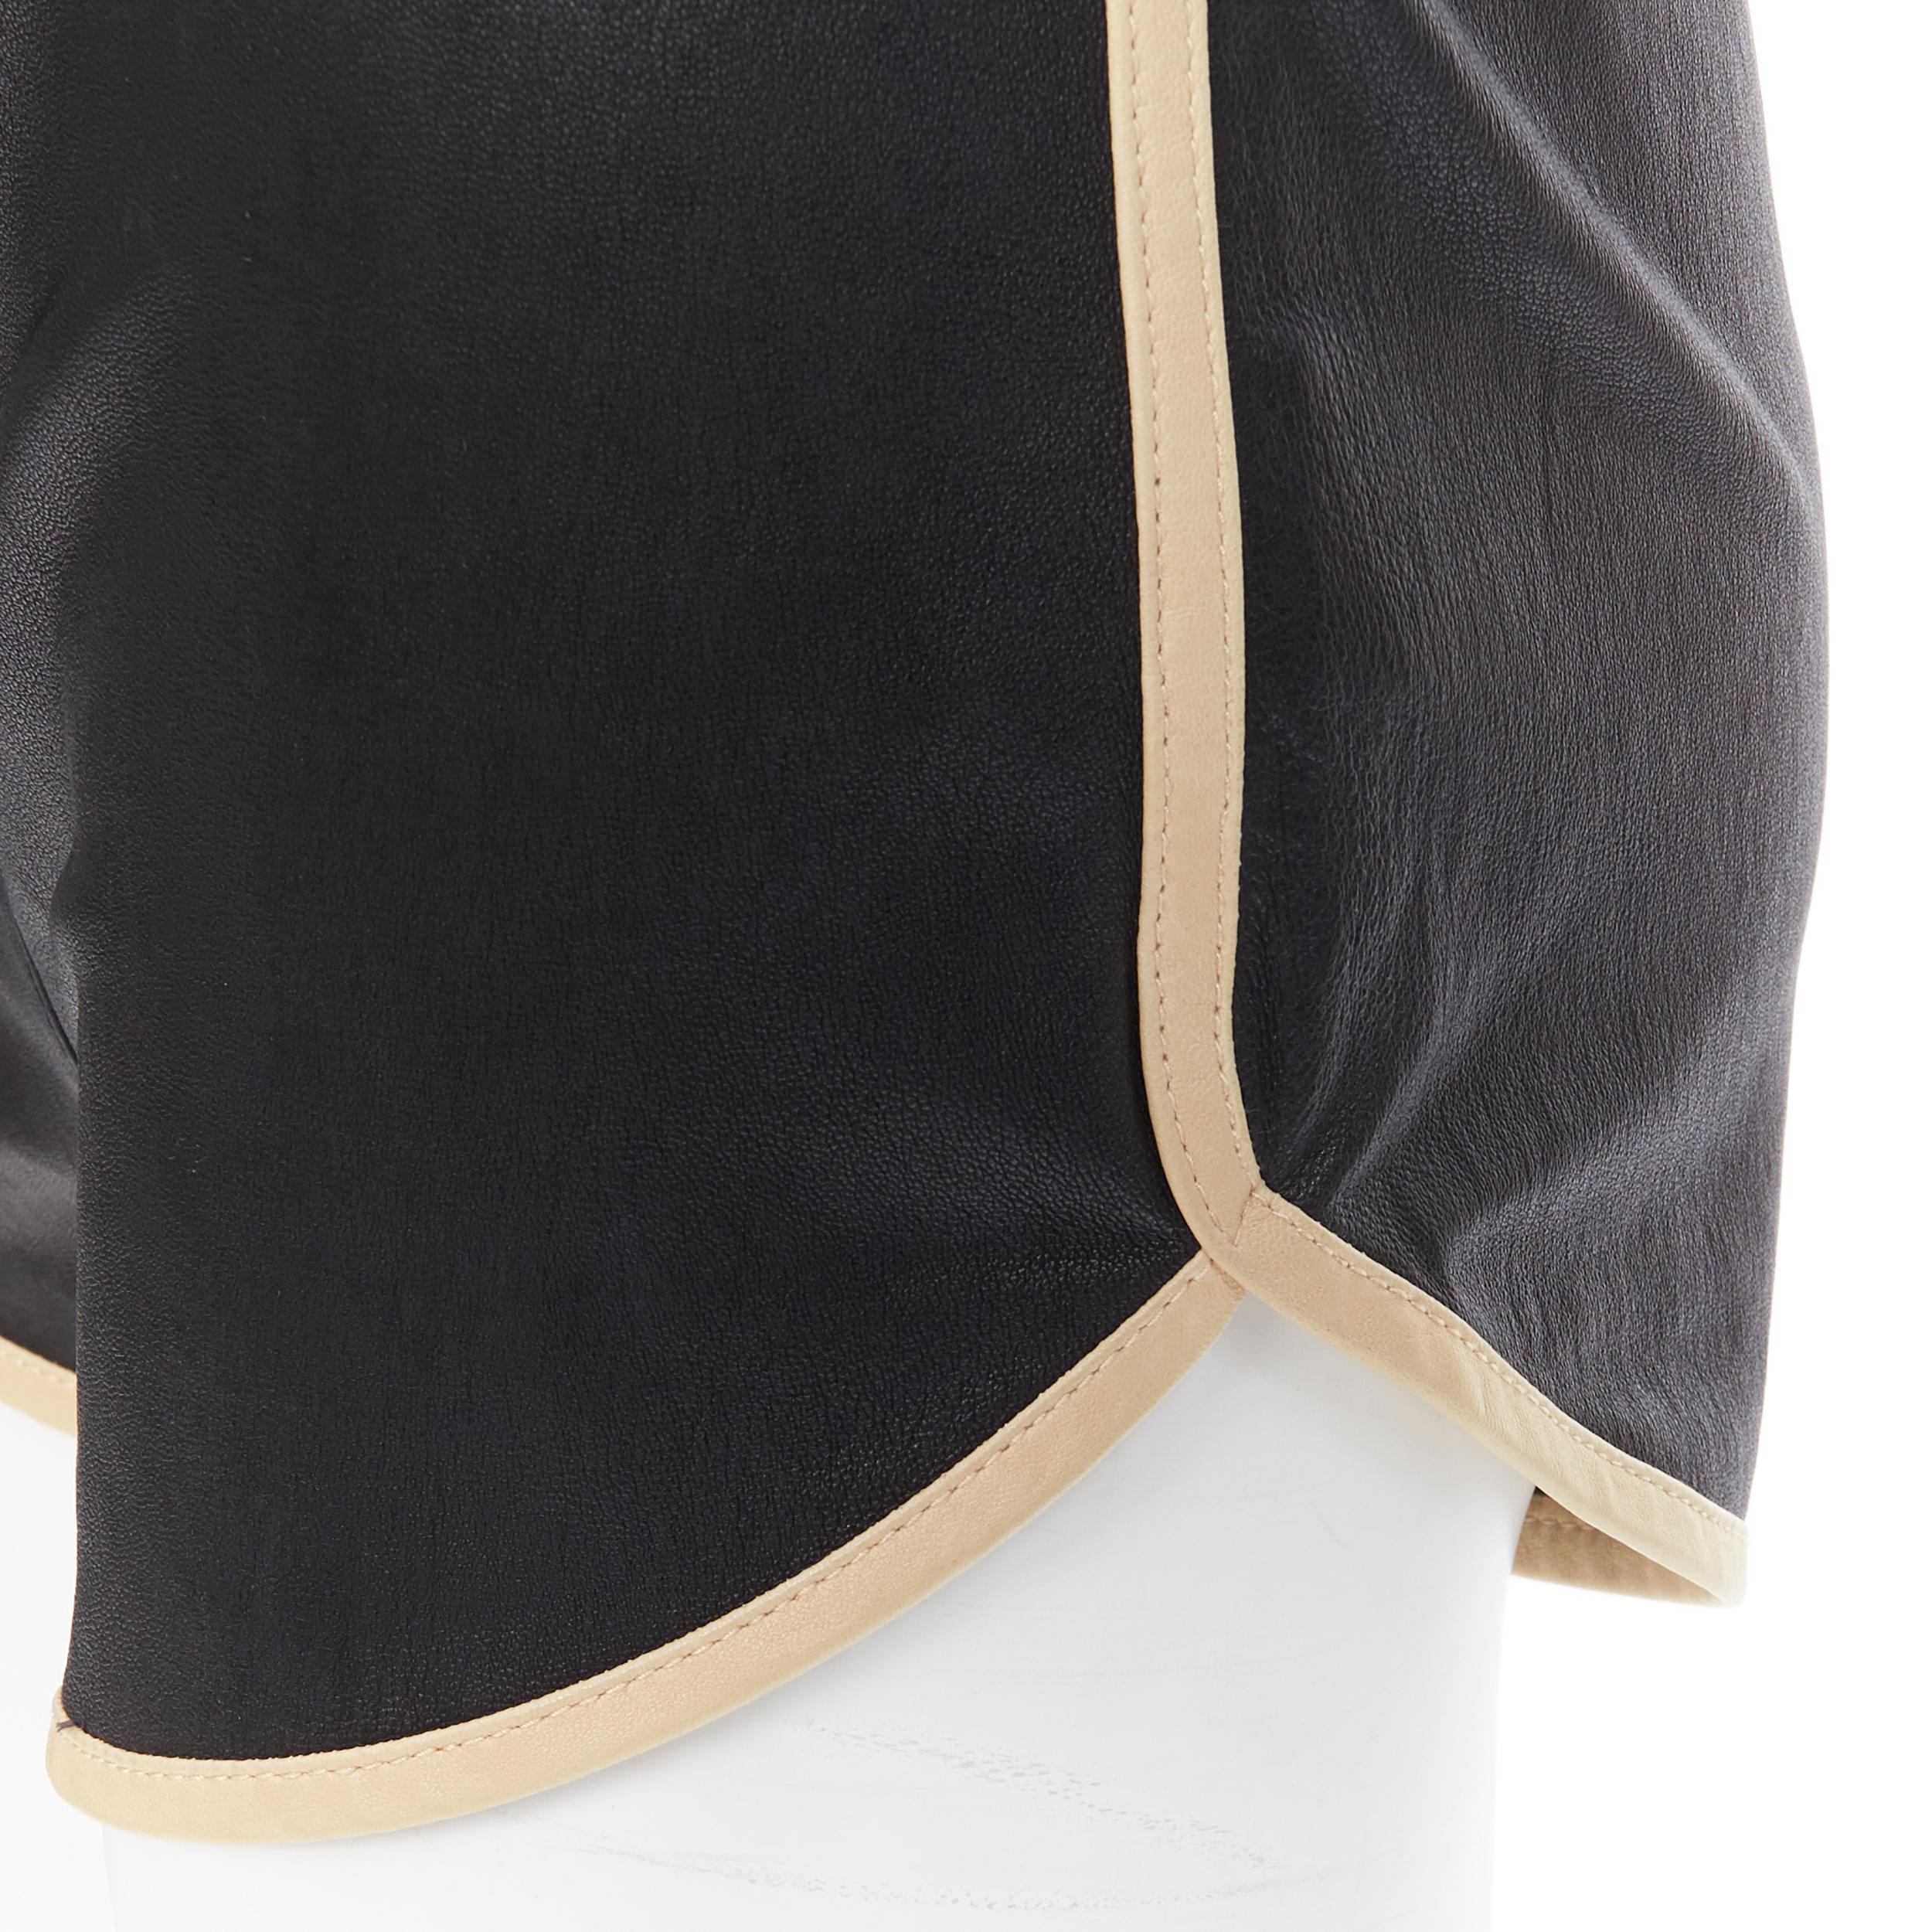 3.1 PHILLIP LIM  black leather beige trimmed curved hem drawstring shorts US0
Reference: LNKO/A01332
Brand: 3.1 Phillip Lim
Designer: Phillip Lim
Material: Leather
Color: Black
Pattern: Solid
Closure: Drawstring
Made in: China

CONDITION:
Condition: